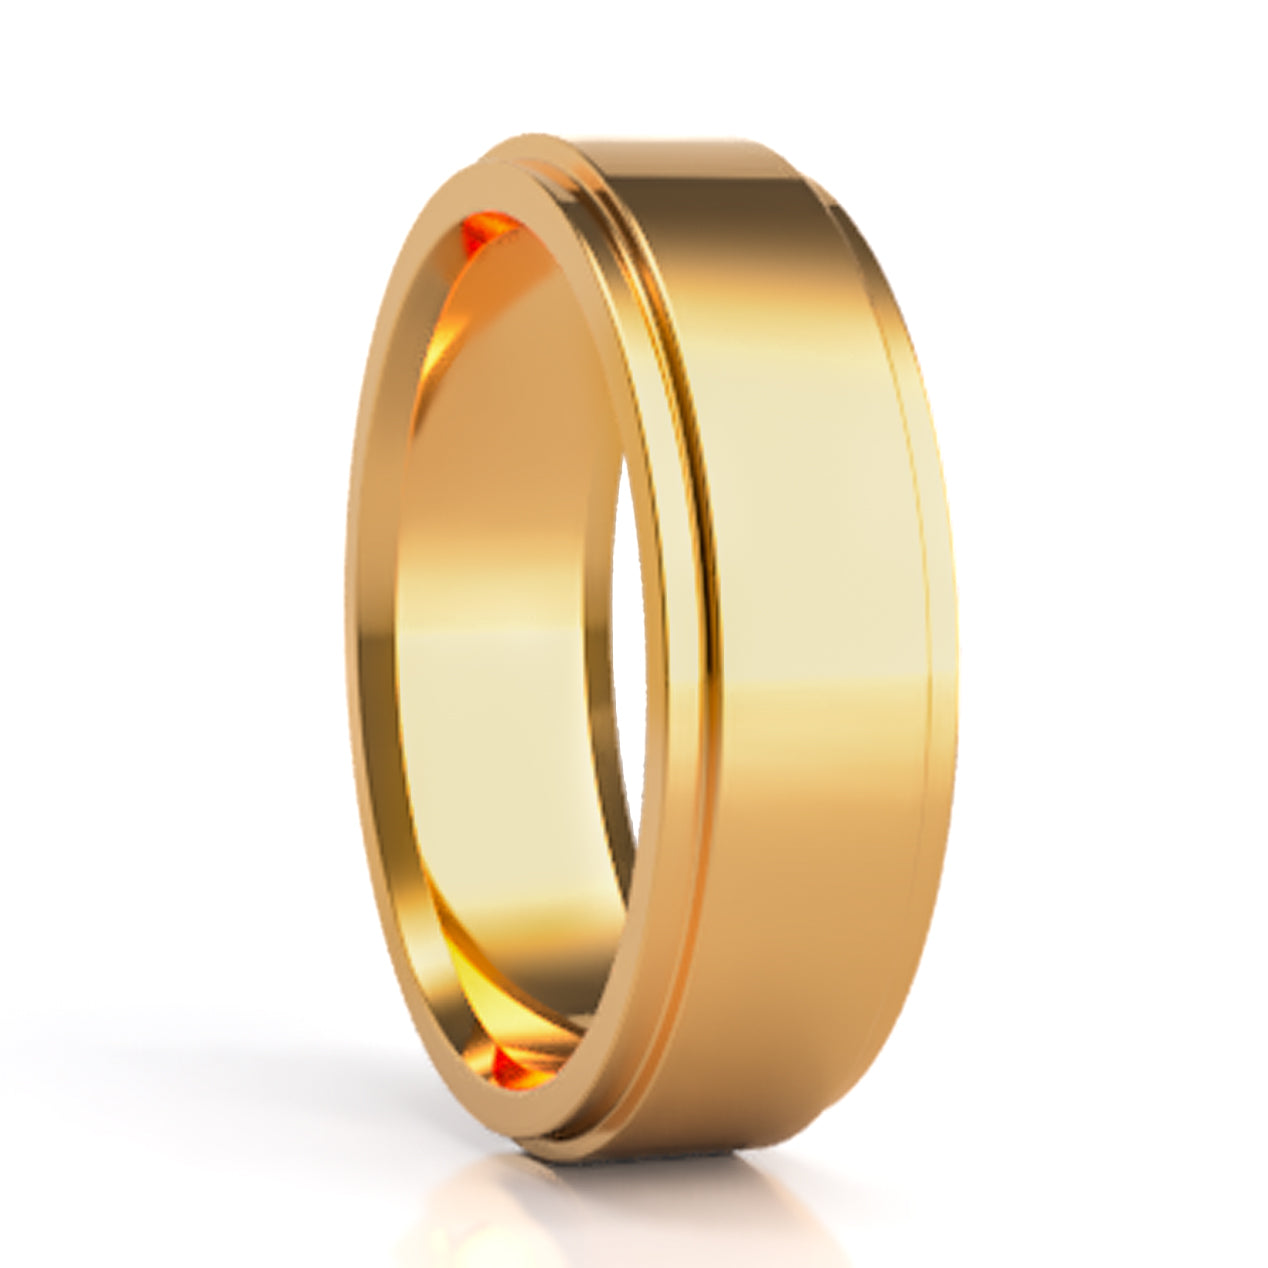 A 10k gold classic style wedding band with stepped edges displayed on a neutral white background.